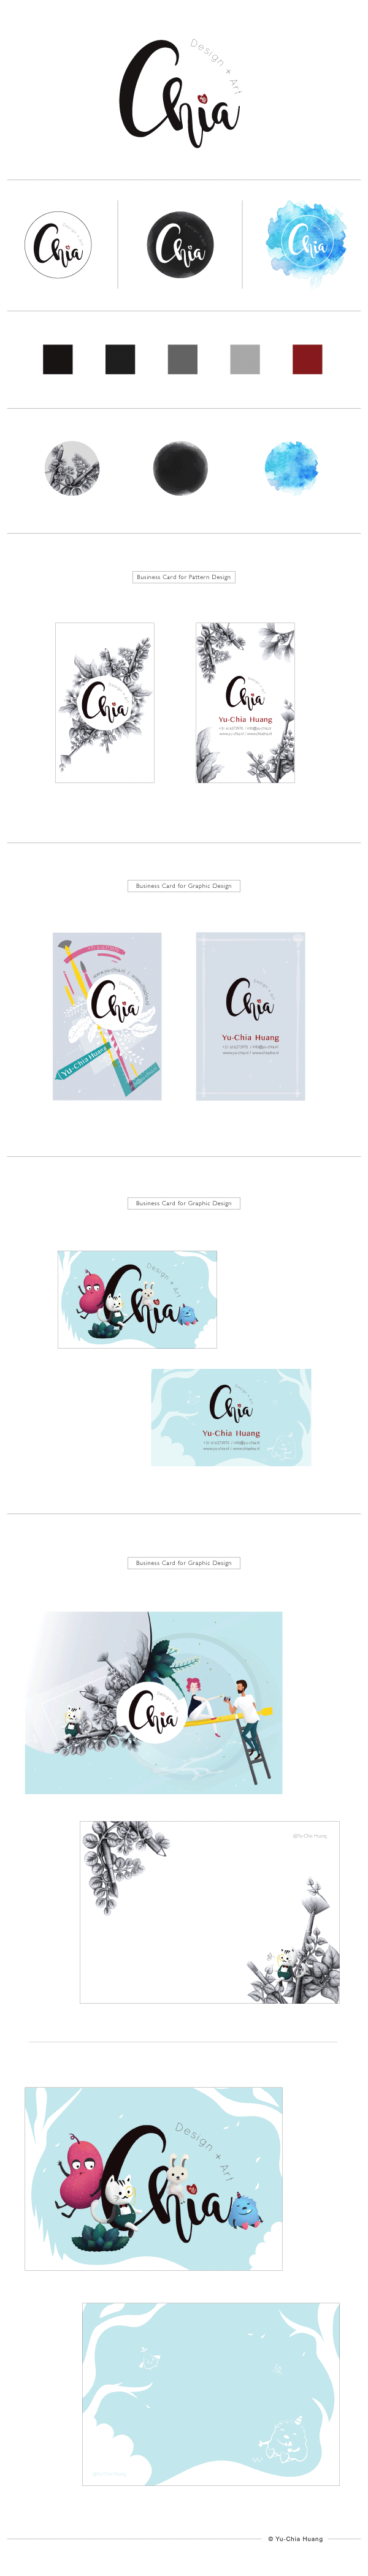 layout-for-chia-logo-and-corporate-design